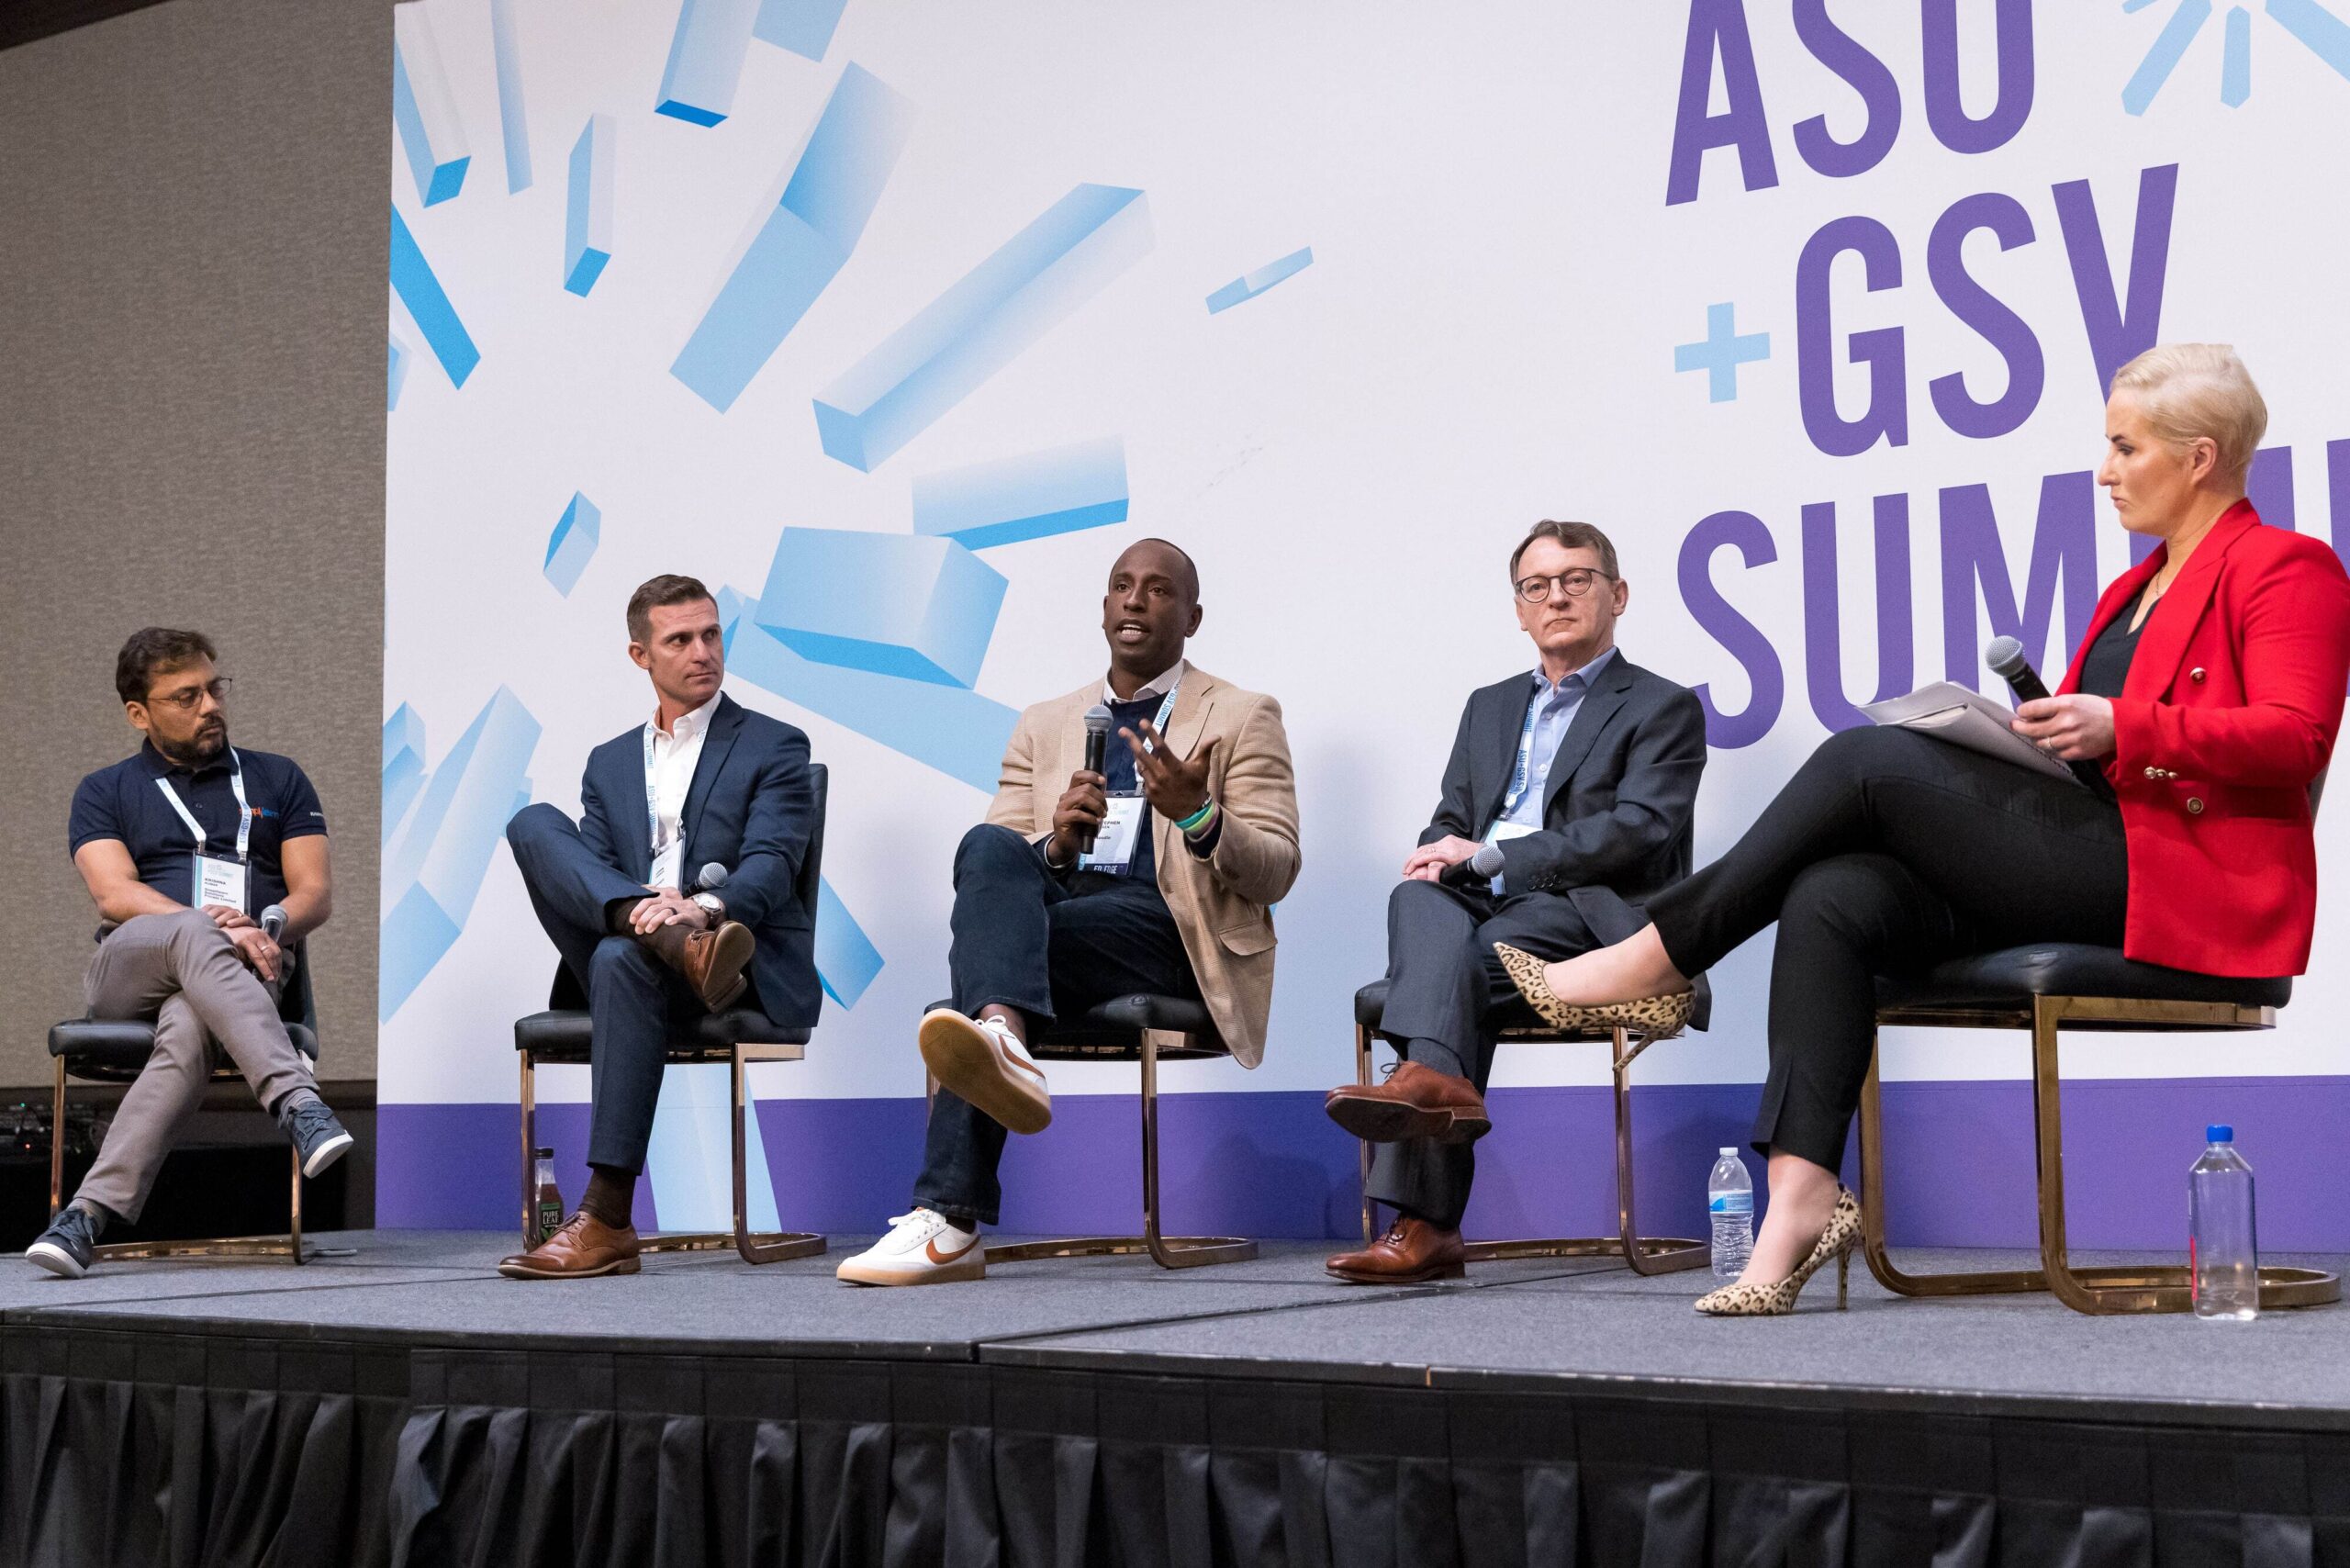 Stephen Green holds a microphone and speaks on a panel at the ASU+GSV Summit